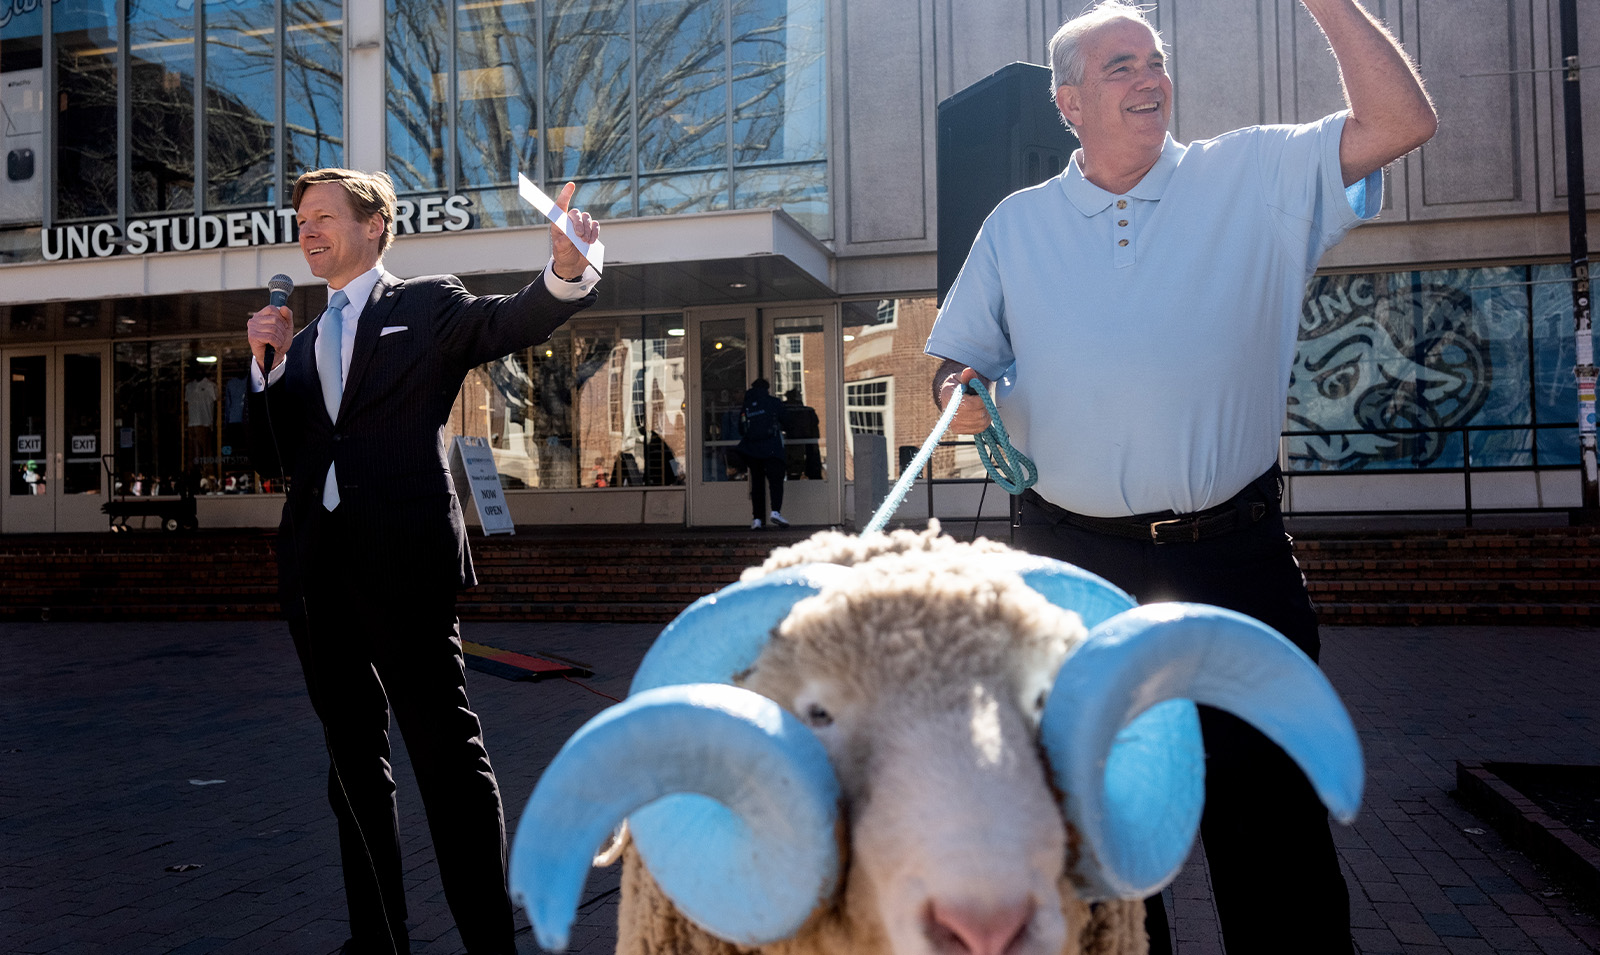 Interim Chancellor Lee H. Roberts giving a speech while a handler holds onto a leash next to a live ram mascot, Rameses.